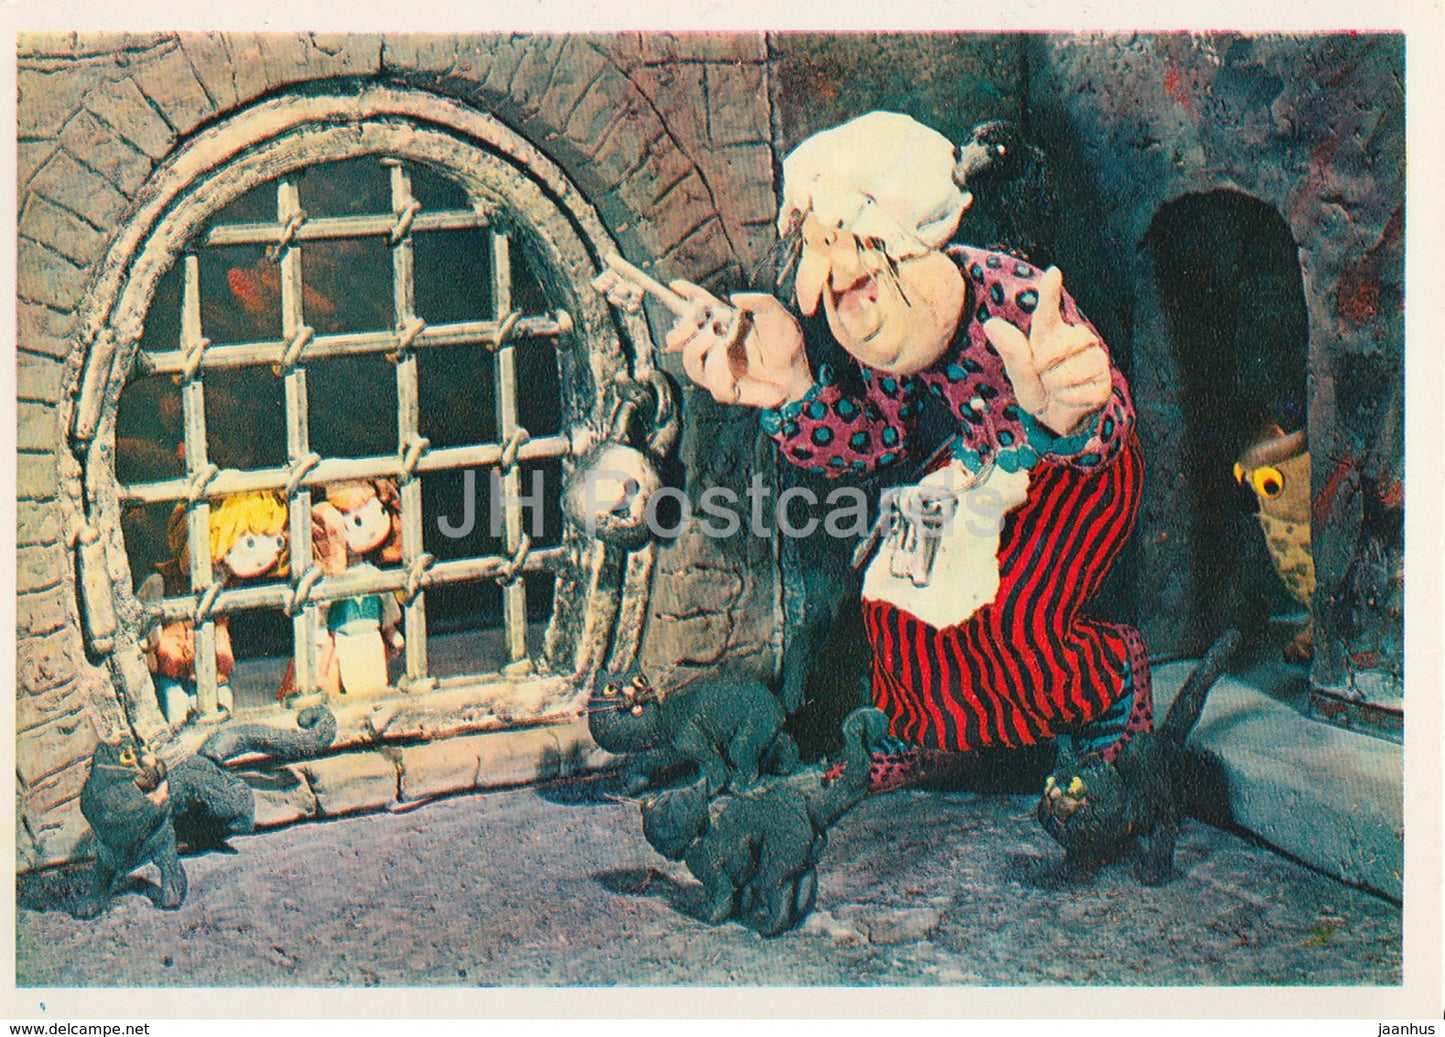 Hansel and Gretel by Brothers Grimm - prisoners - cats - dolls - Fairy Tale - 1975 - Russia USSR - unused - JH Postcards